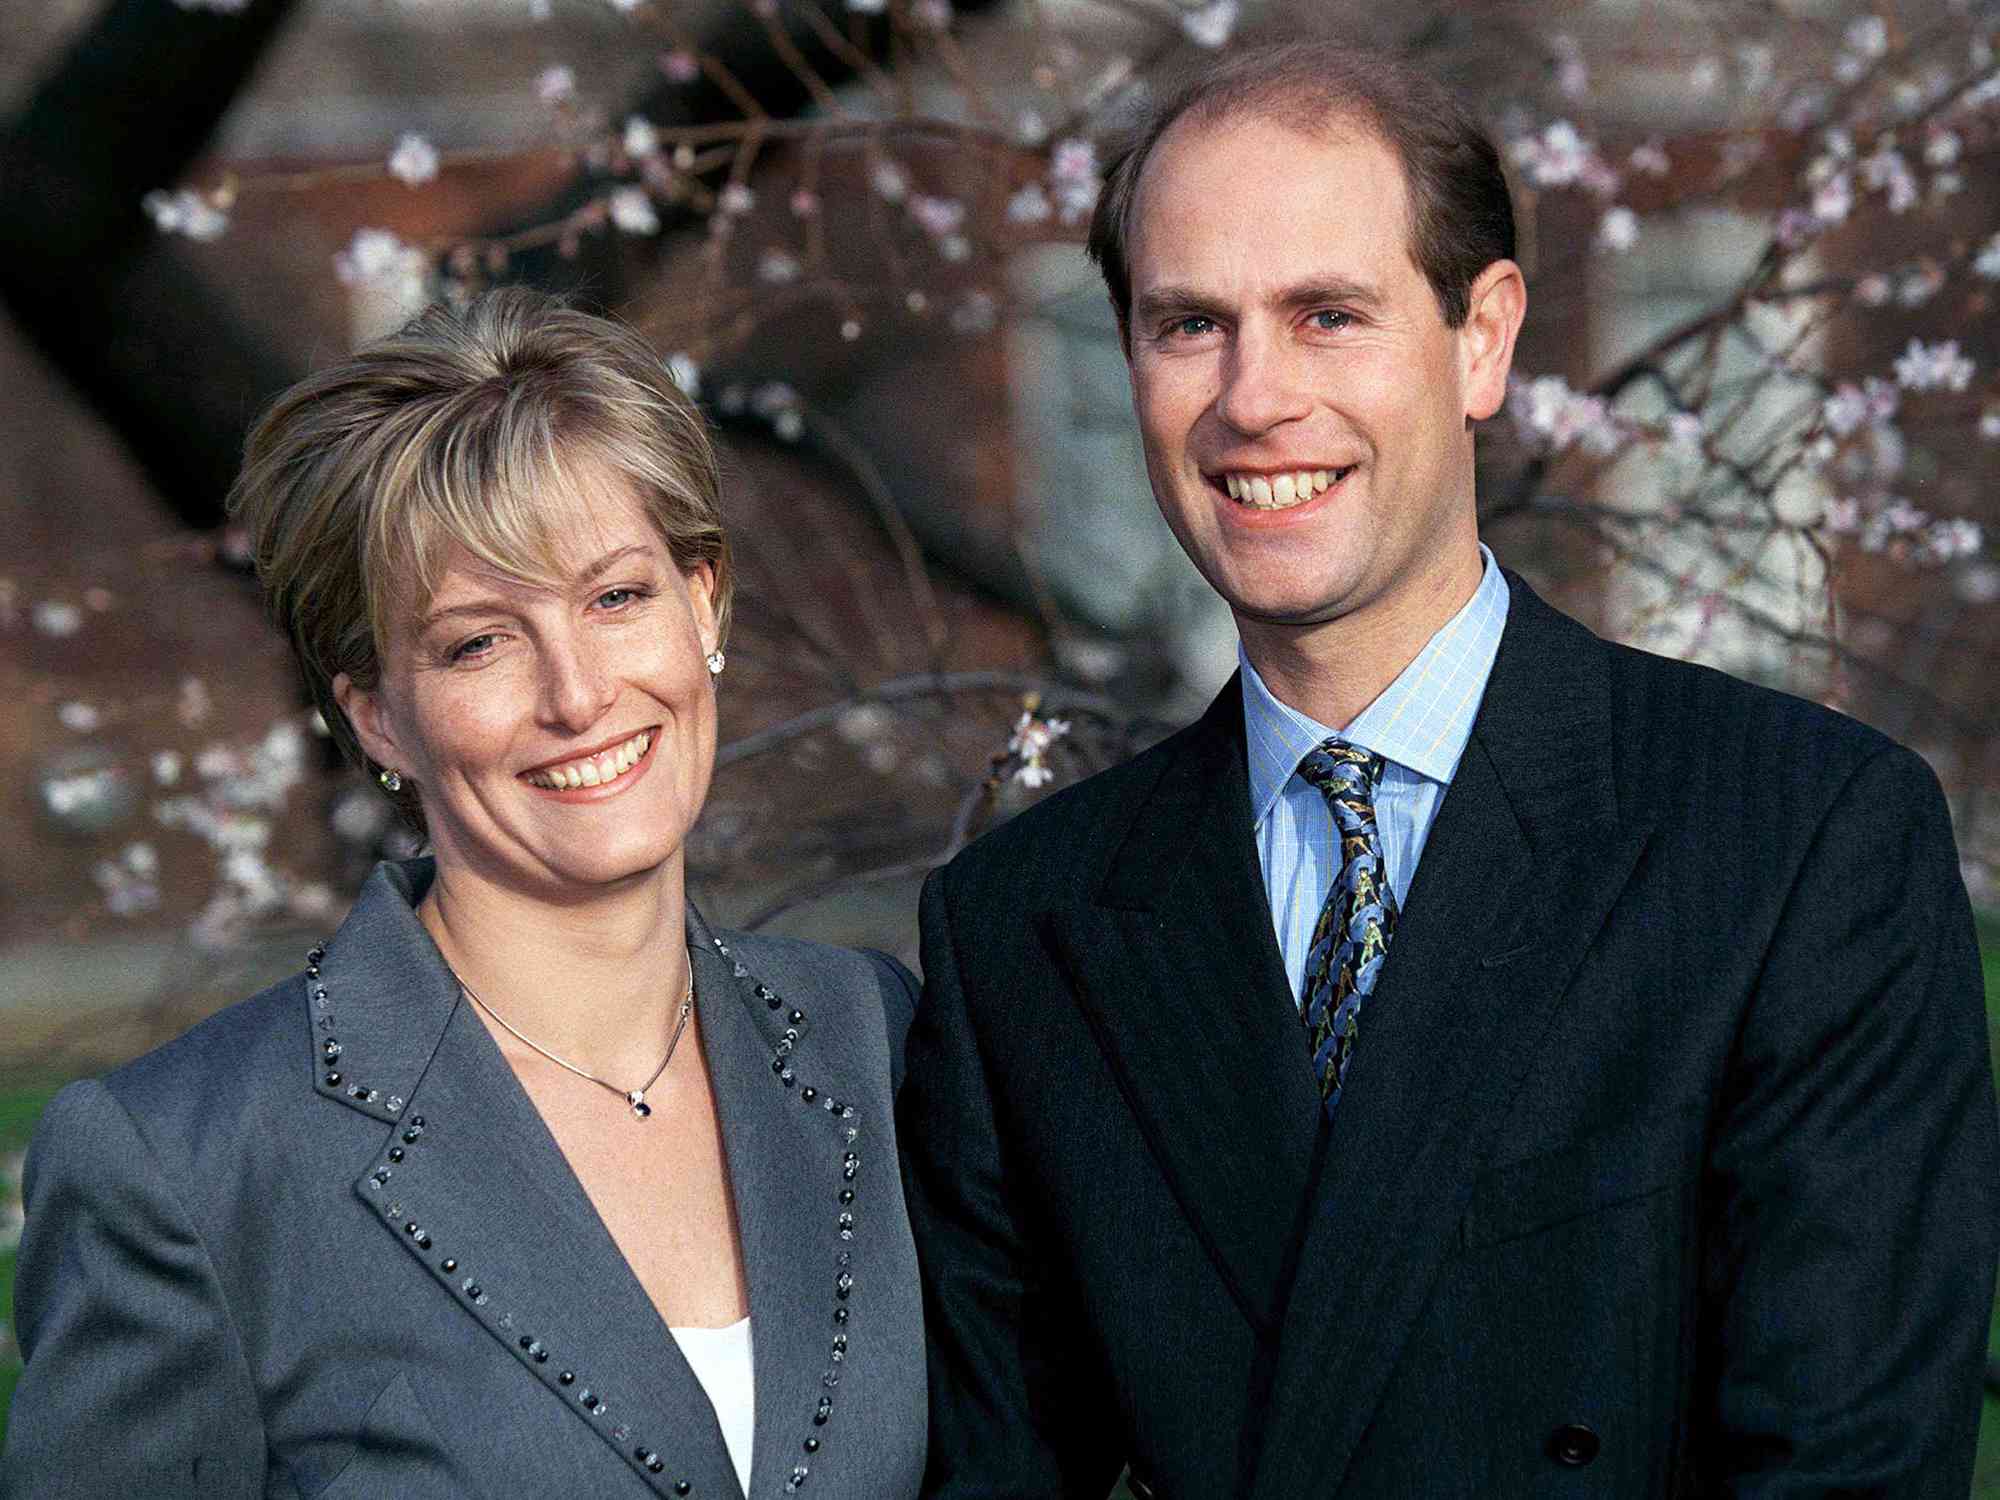 Prince Edward And His Fiancee Sophie Rhys-jones On The Day Of Their Engagement